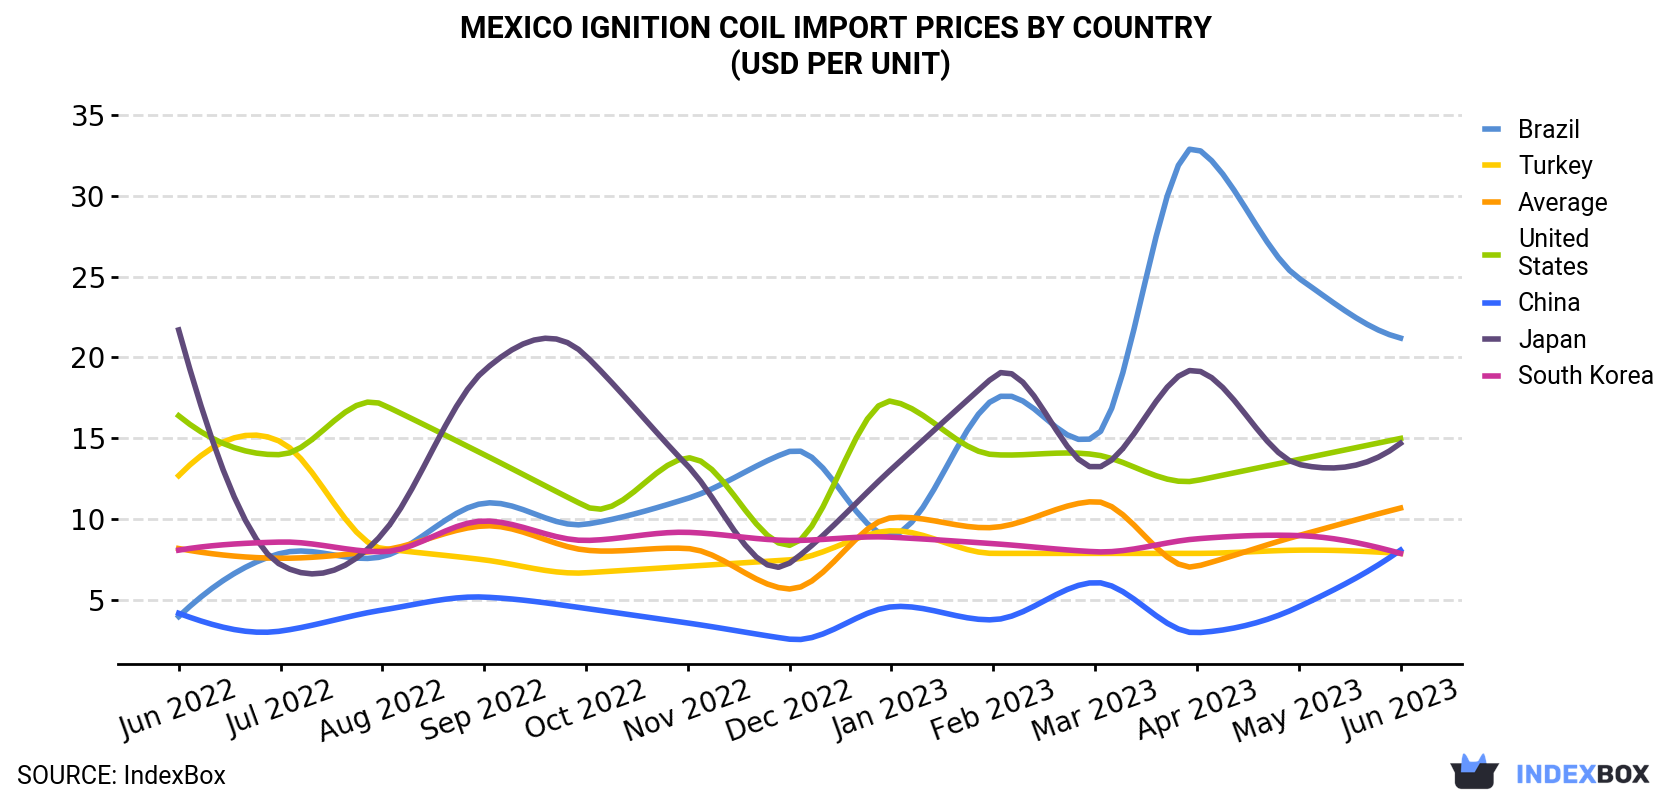 Mexico Ignition Coil Import Prices By Country (USD Per Unit)